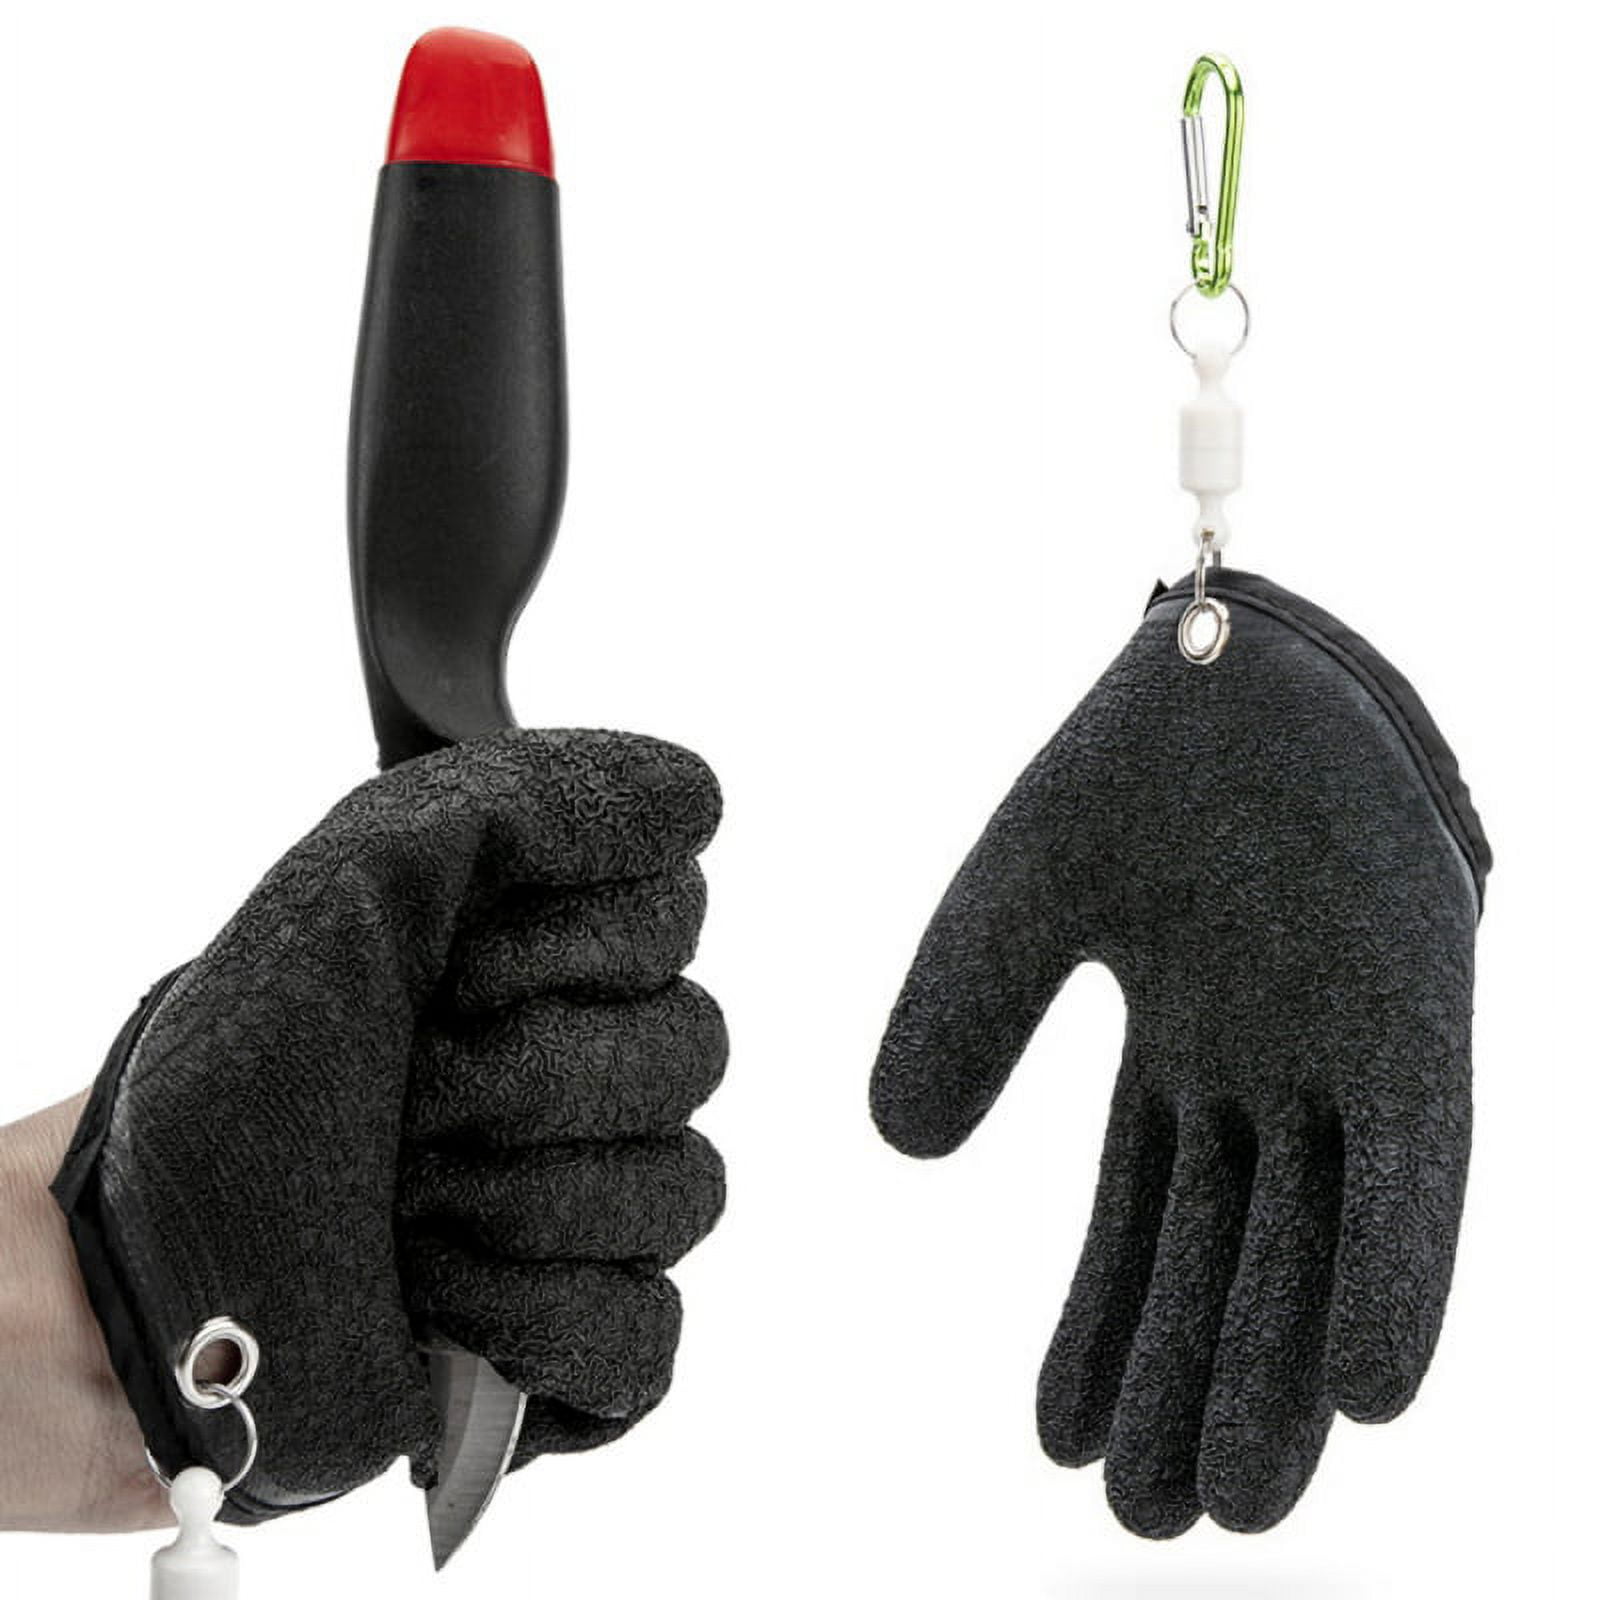 MNFT Fishing Fleece Lined Gloves Protective Handshield With Magnet